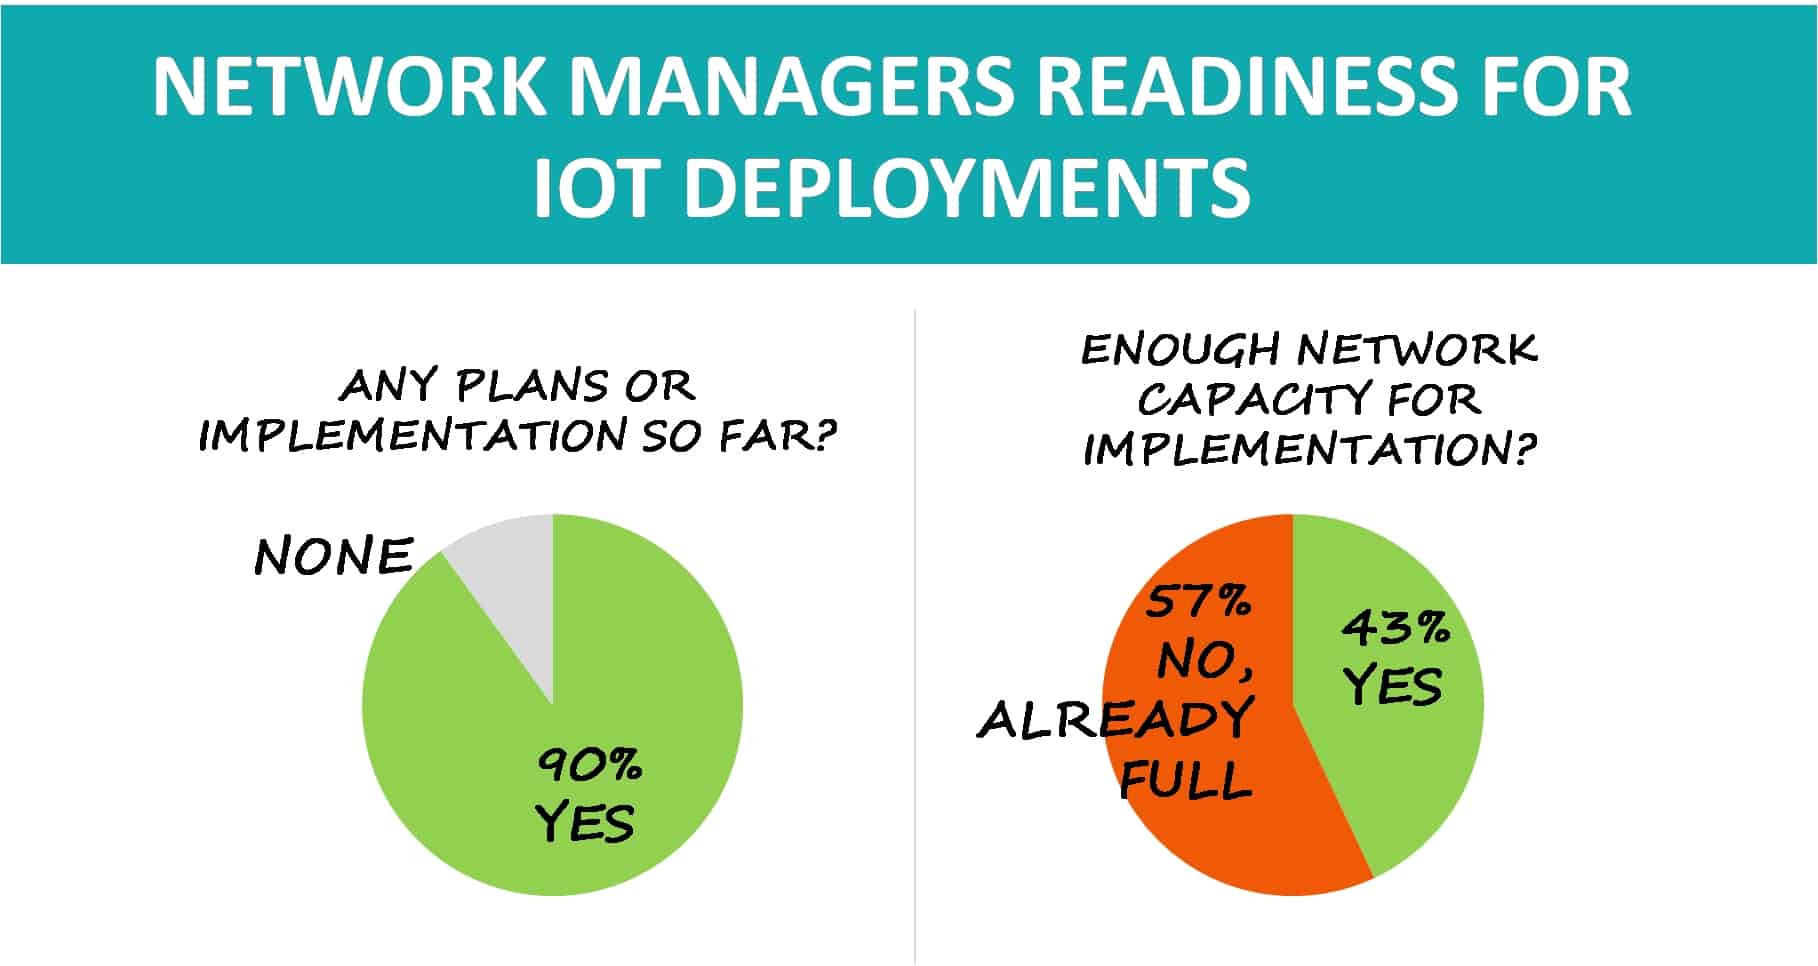 57% Worry That Network Capacity is Inadequate for IoT, Says Infoblox